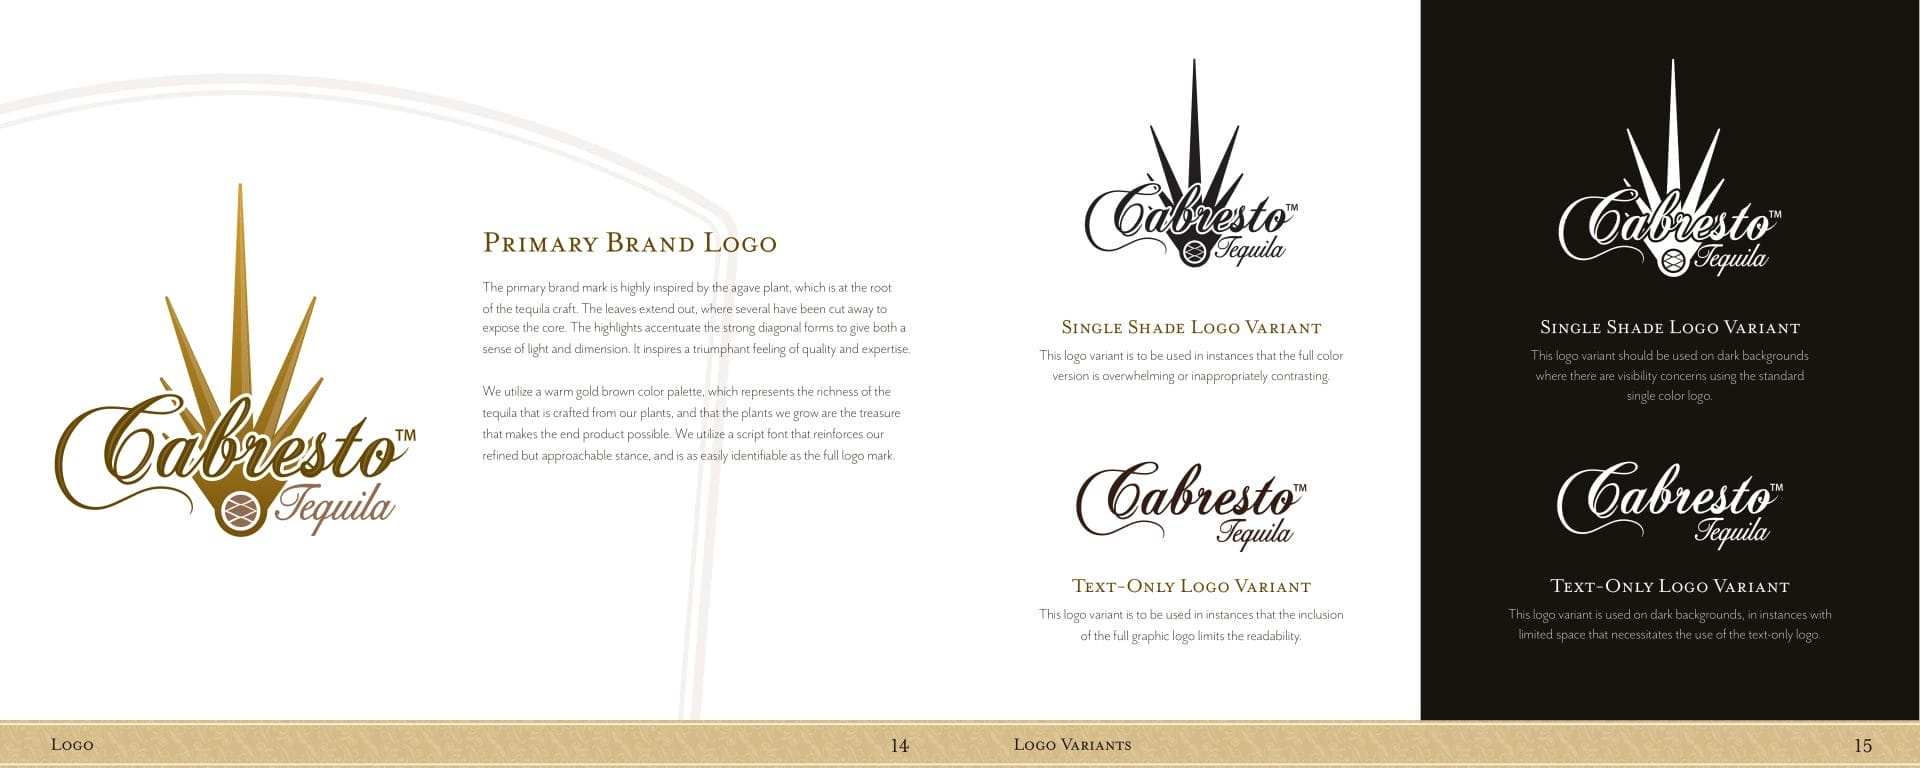 Tequila Cabresto brand book final spread, featuring logo placement. Created by Perfect Afternoon.